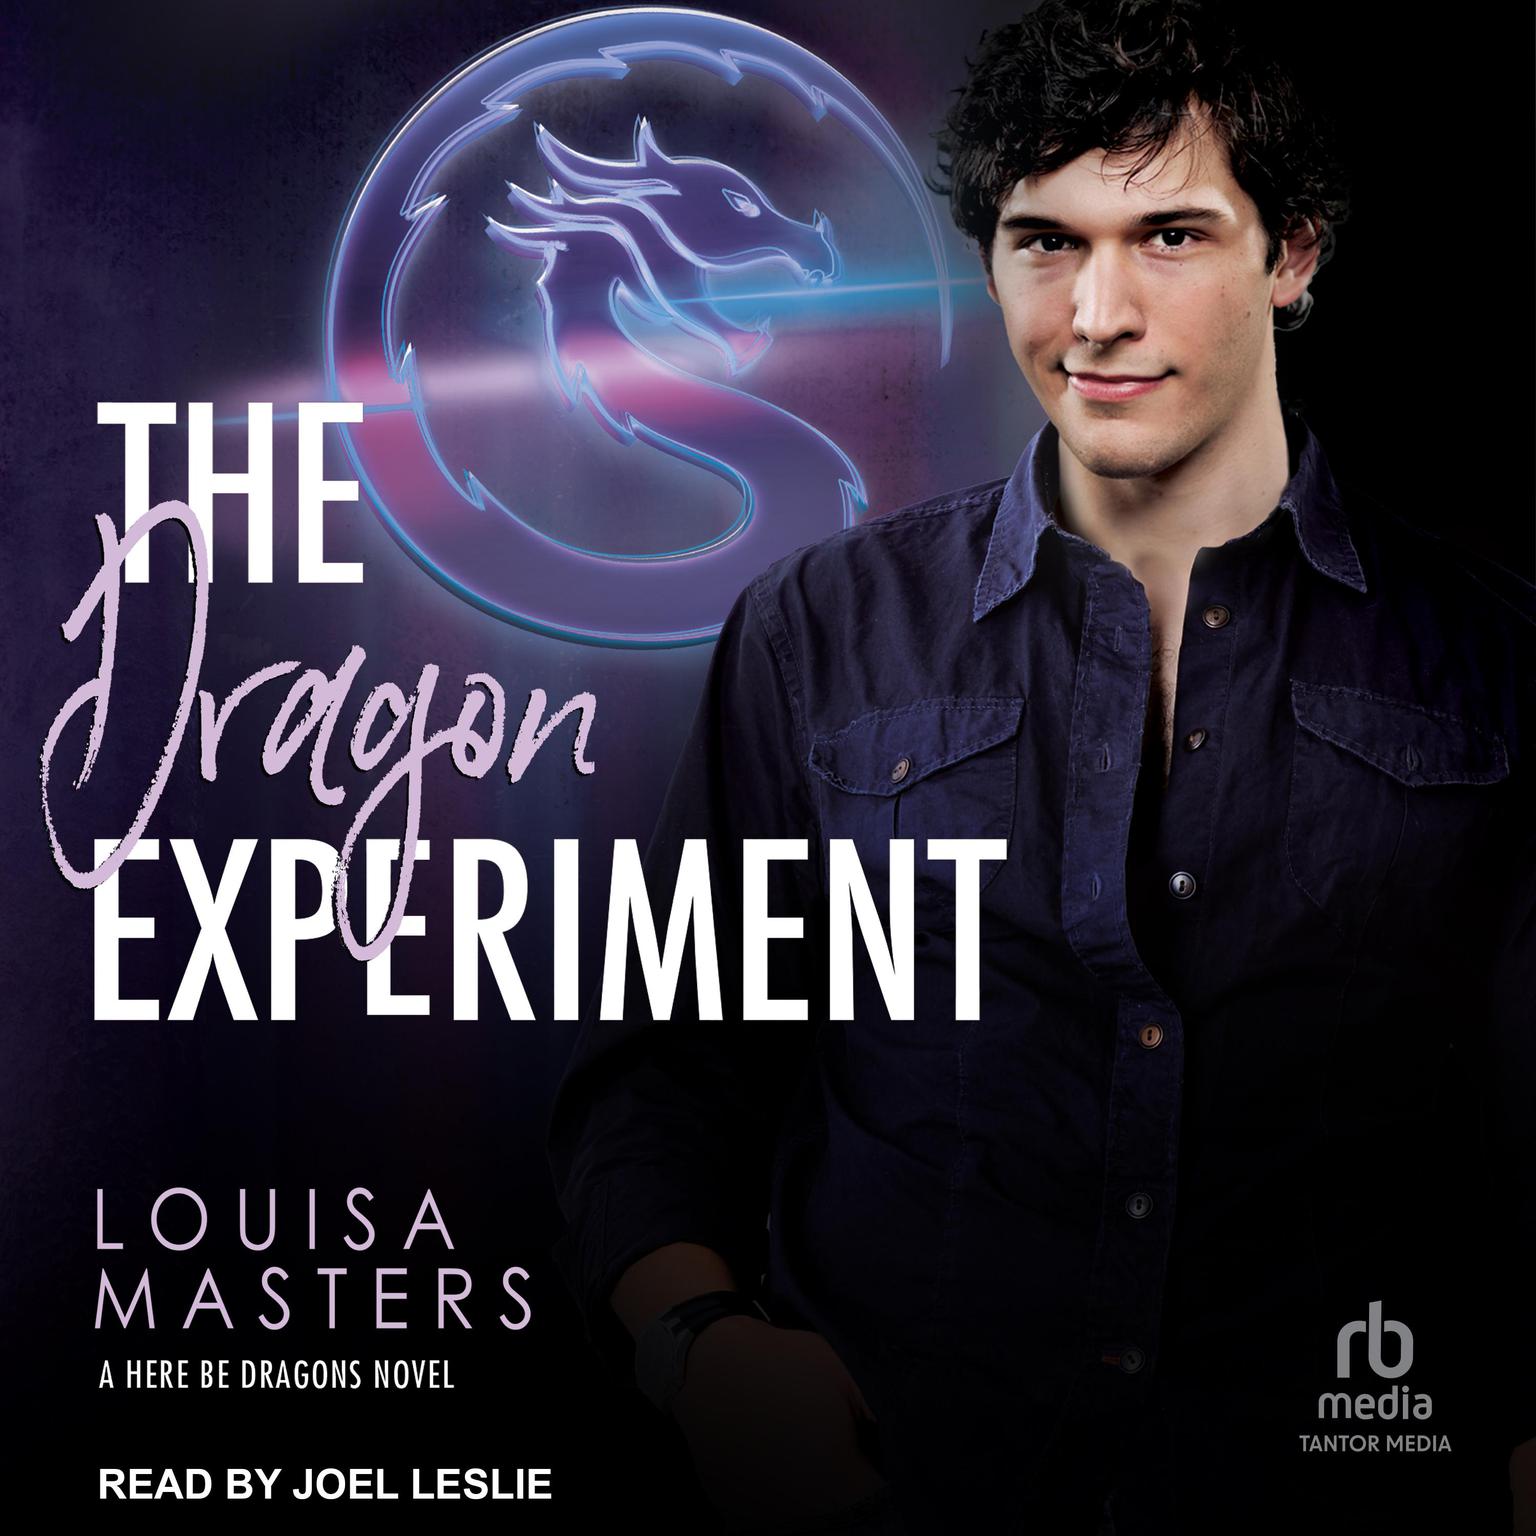 The Dragon Experiment Audiobook, by Louisa Masters